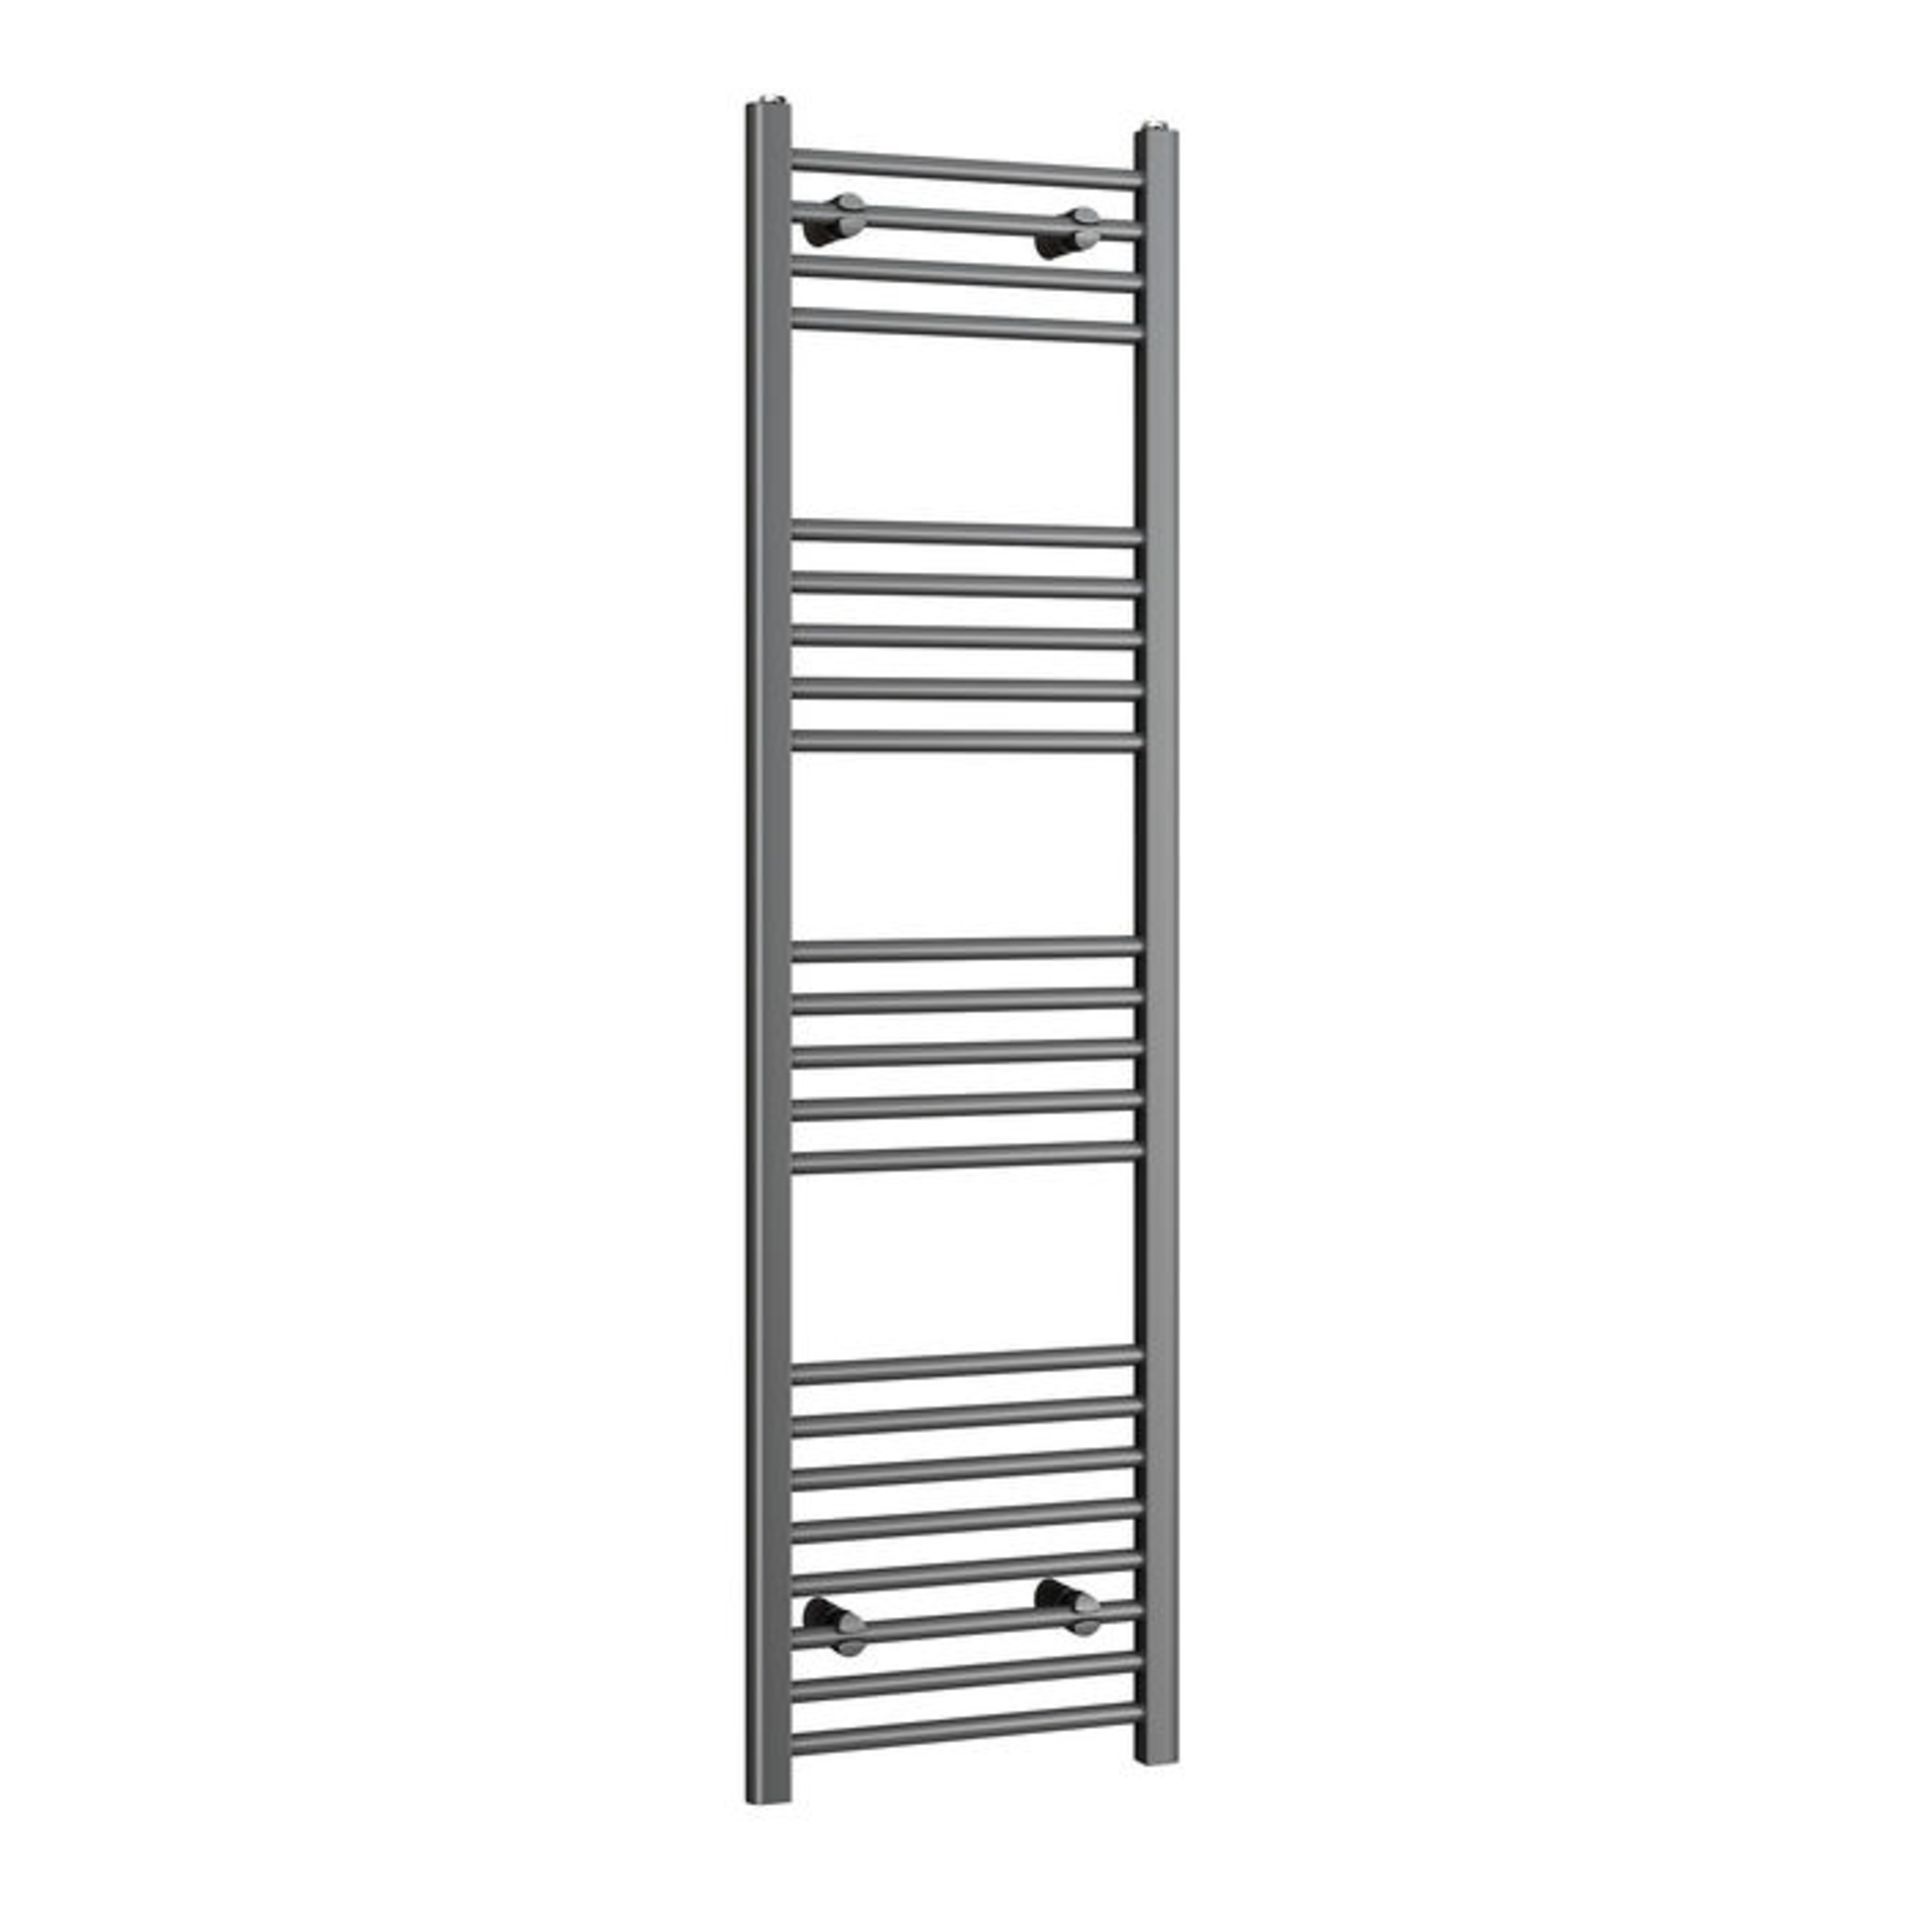 (AD259) 1800x400mm - 20mm Tubes - Anthracite Heated Straight Rail Ladder Towel Radiator. RRP £209. - Image 4 of 4